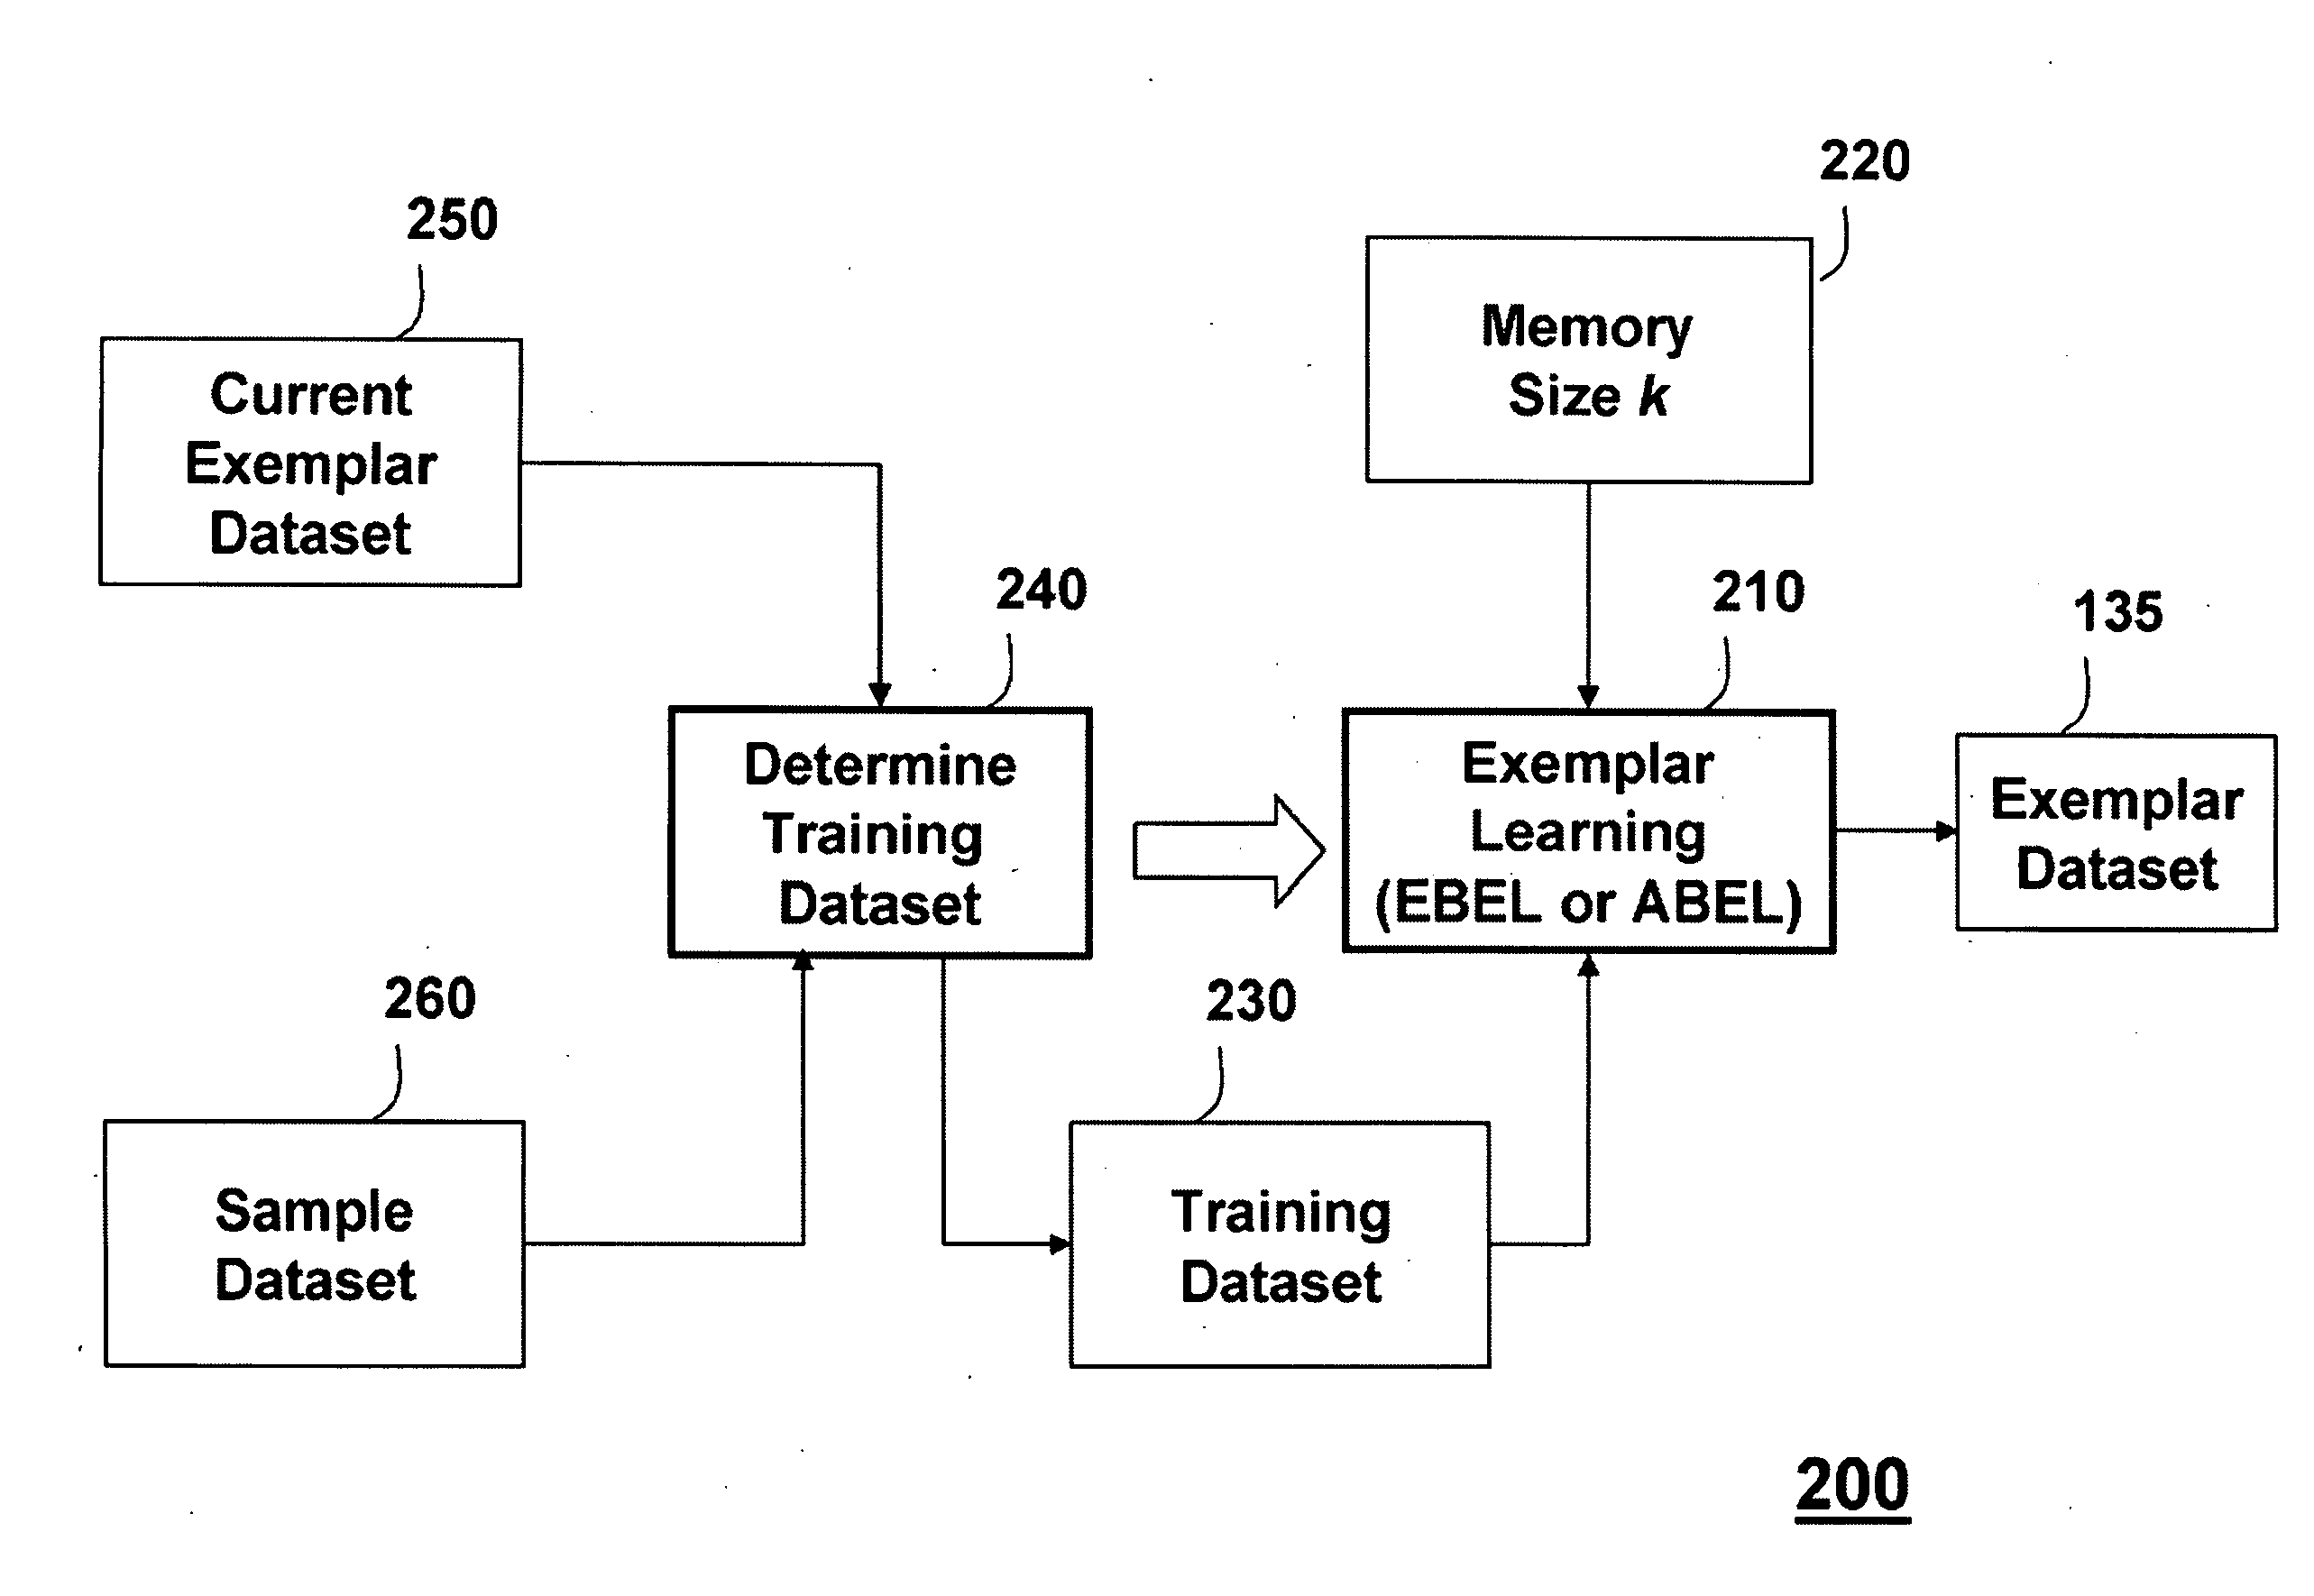 Method and System for Classifying Data in System with Limited Memory